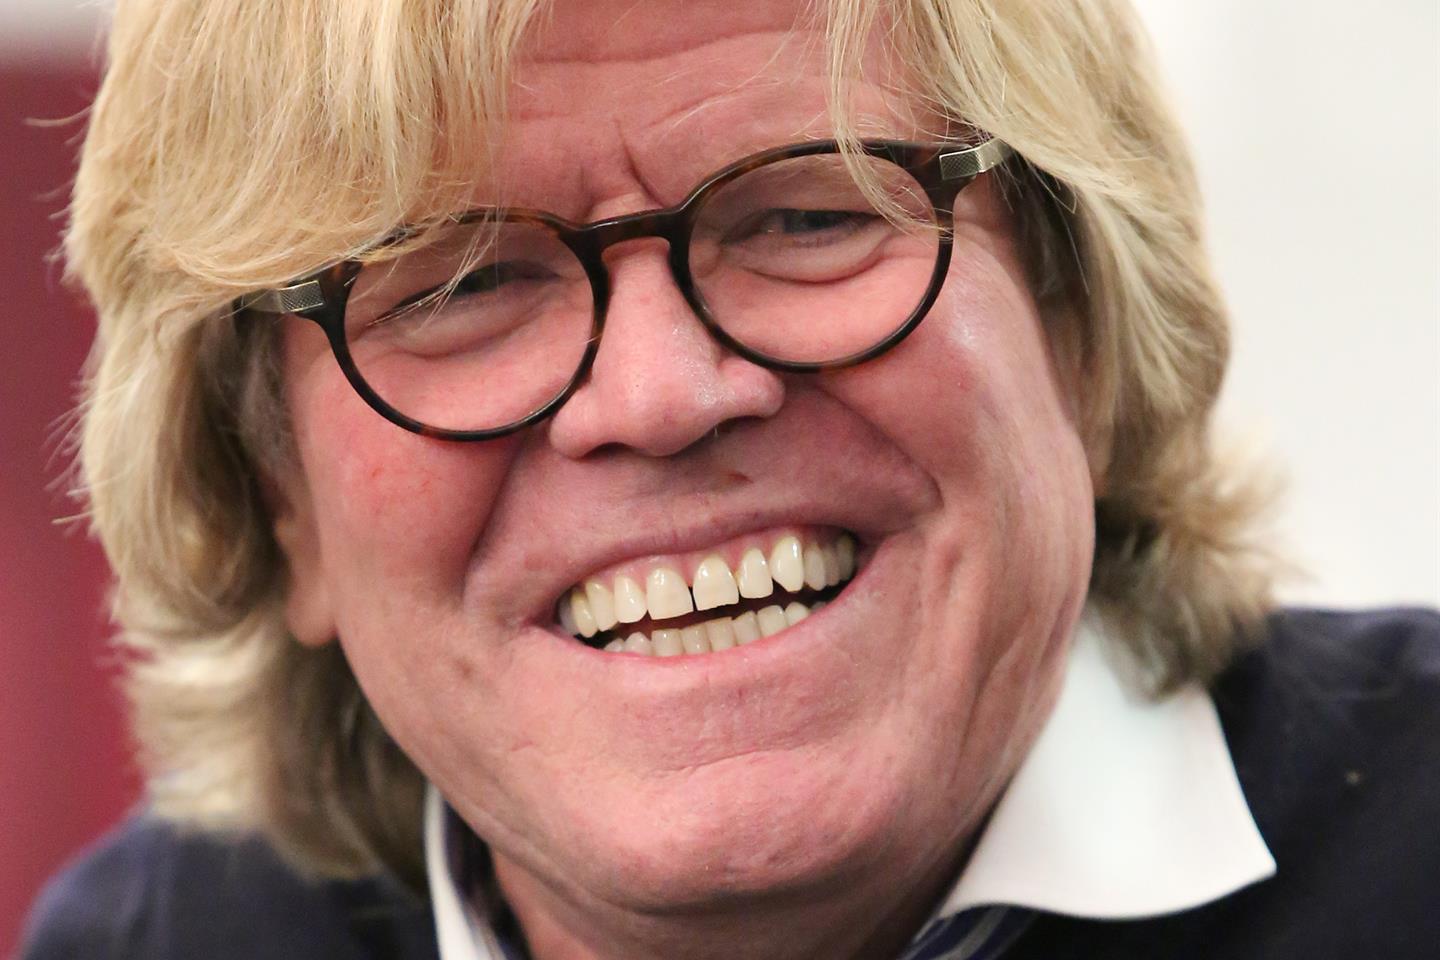 Peter Noone Tickets | Peter Noone Tour Dates 2023 and Concert Tickets - viagogo